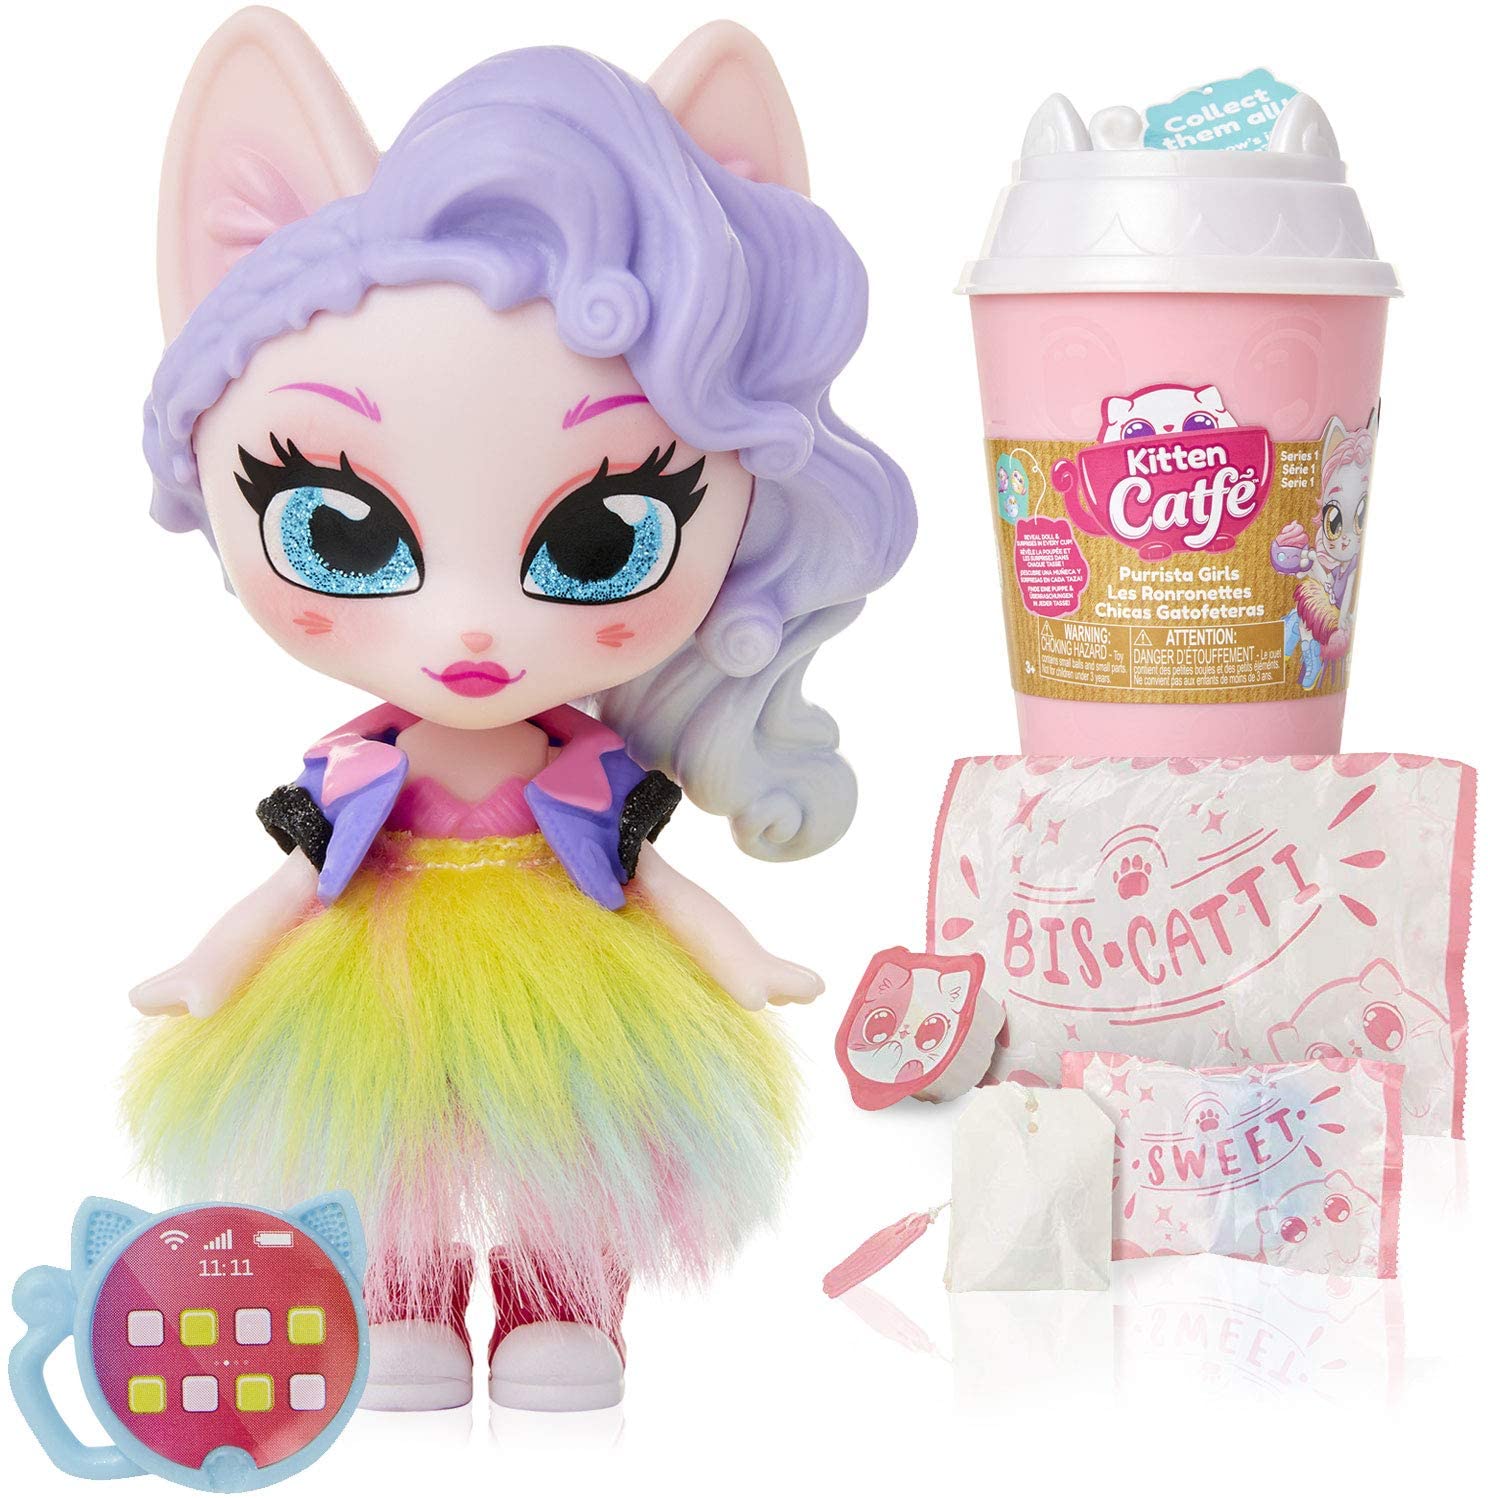 Kitten Catfé Purrista Figure Series #1 Doll w/ Accessories $5 + Free Shipping w/ Amazon Prime or Orders $25+